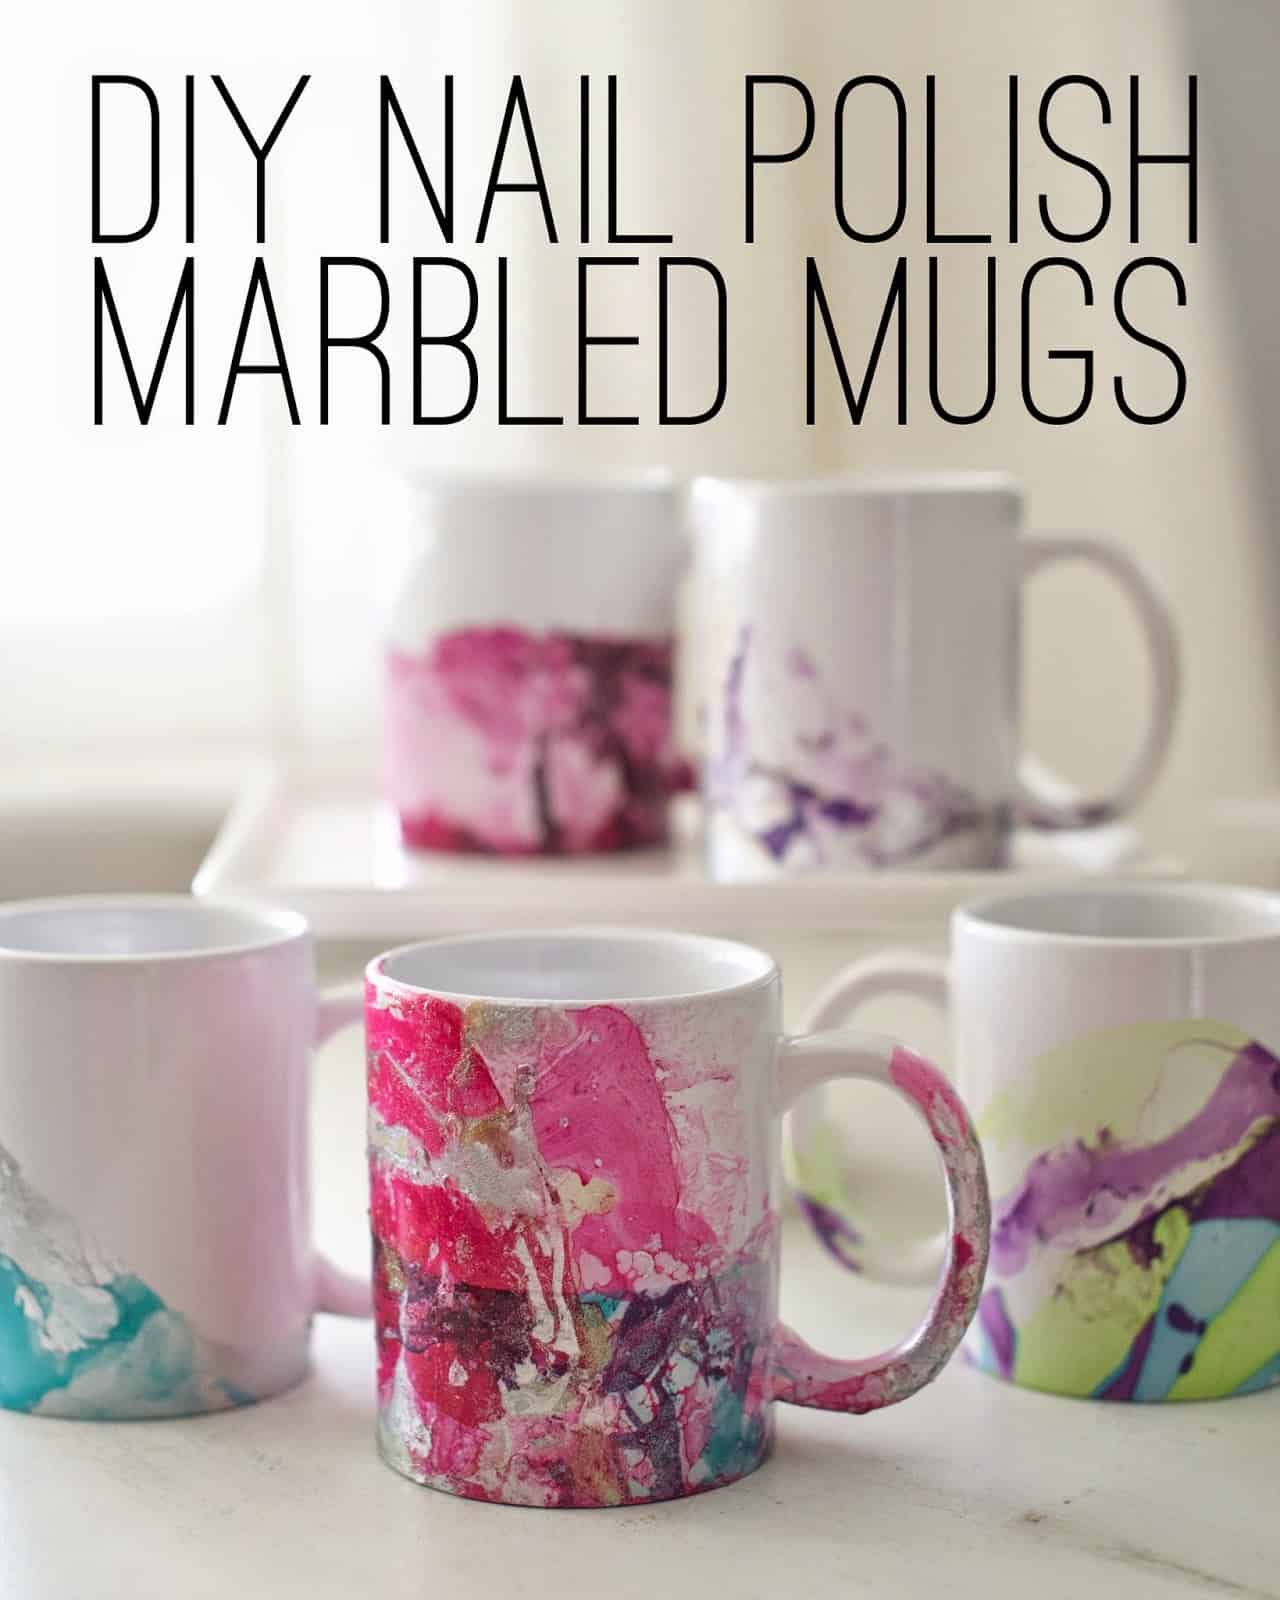 DIY Marble Dipped Mugs - The Sweetest Occasion